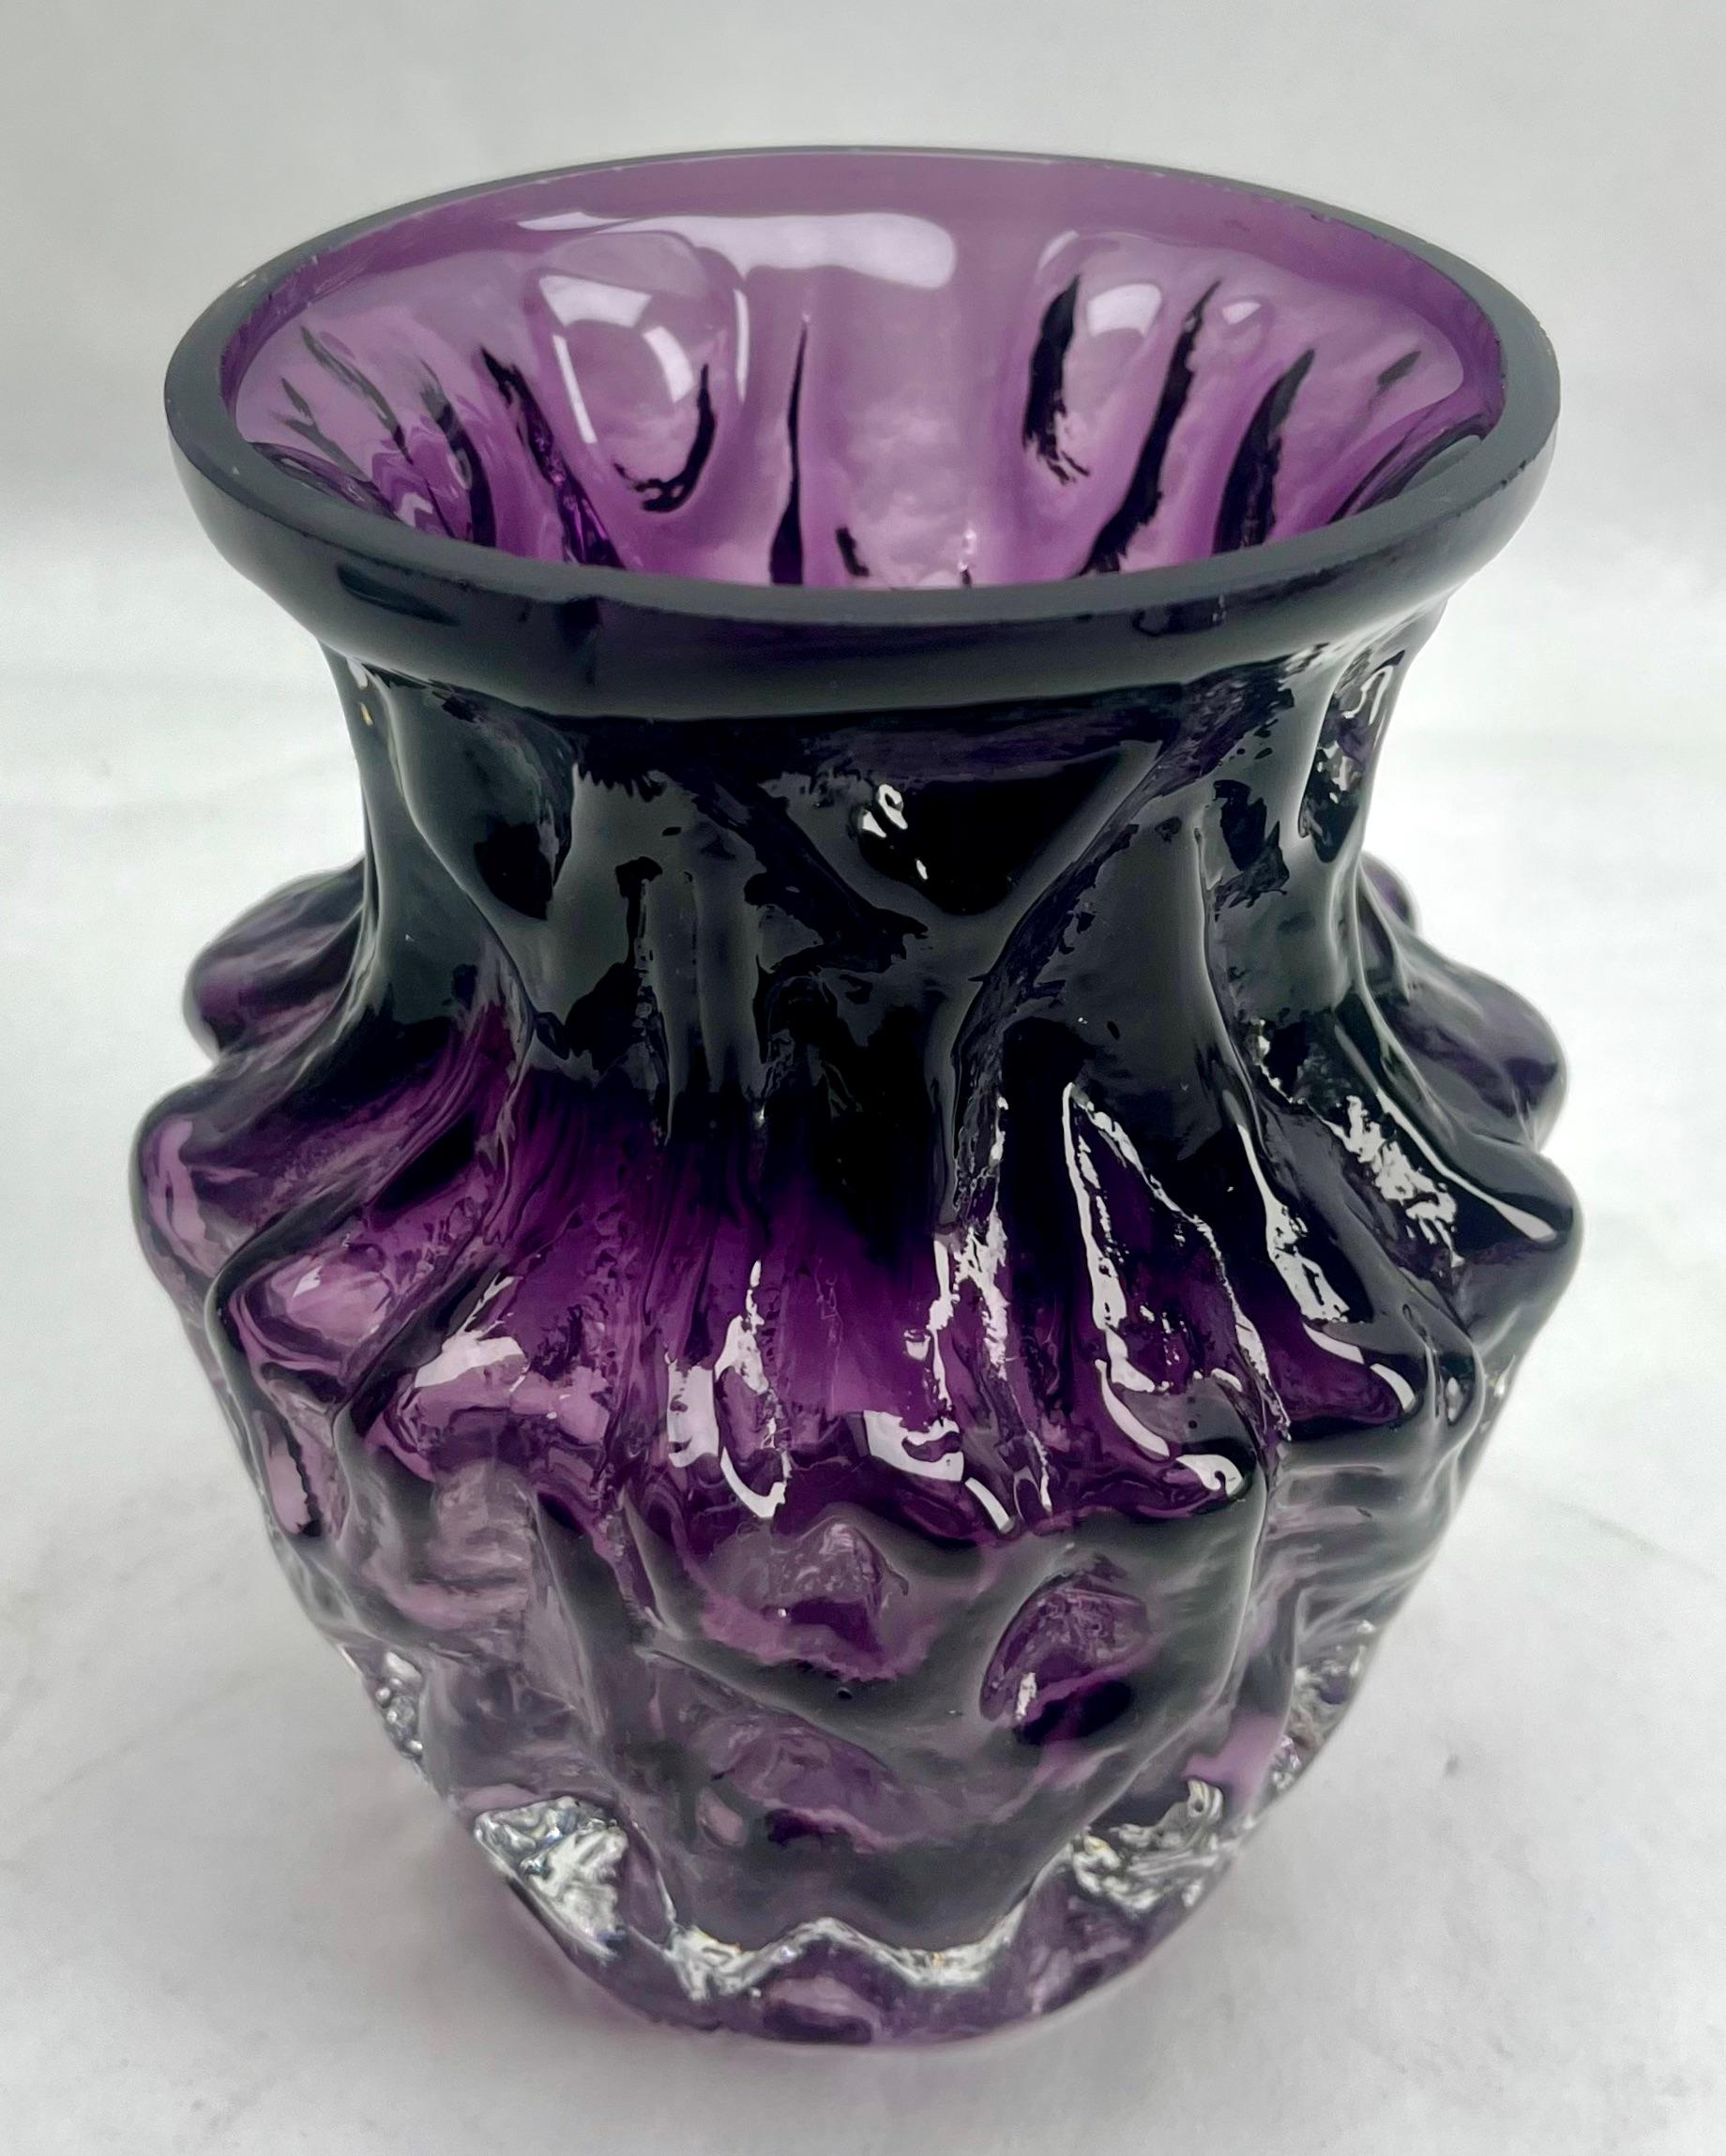 Impressions made from tree bark were first used to make moulds in the early 1970s, as factories investigated new ways to bring surface texture to glass objects. Some models are colored throughout while others have a colored core with a thick